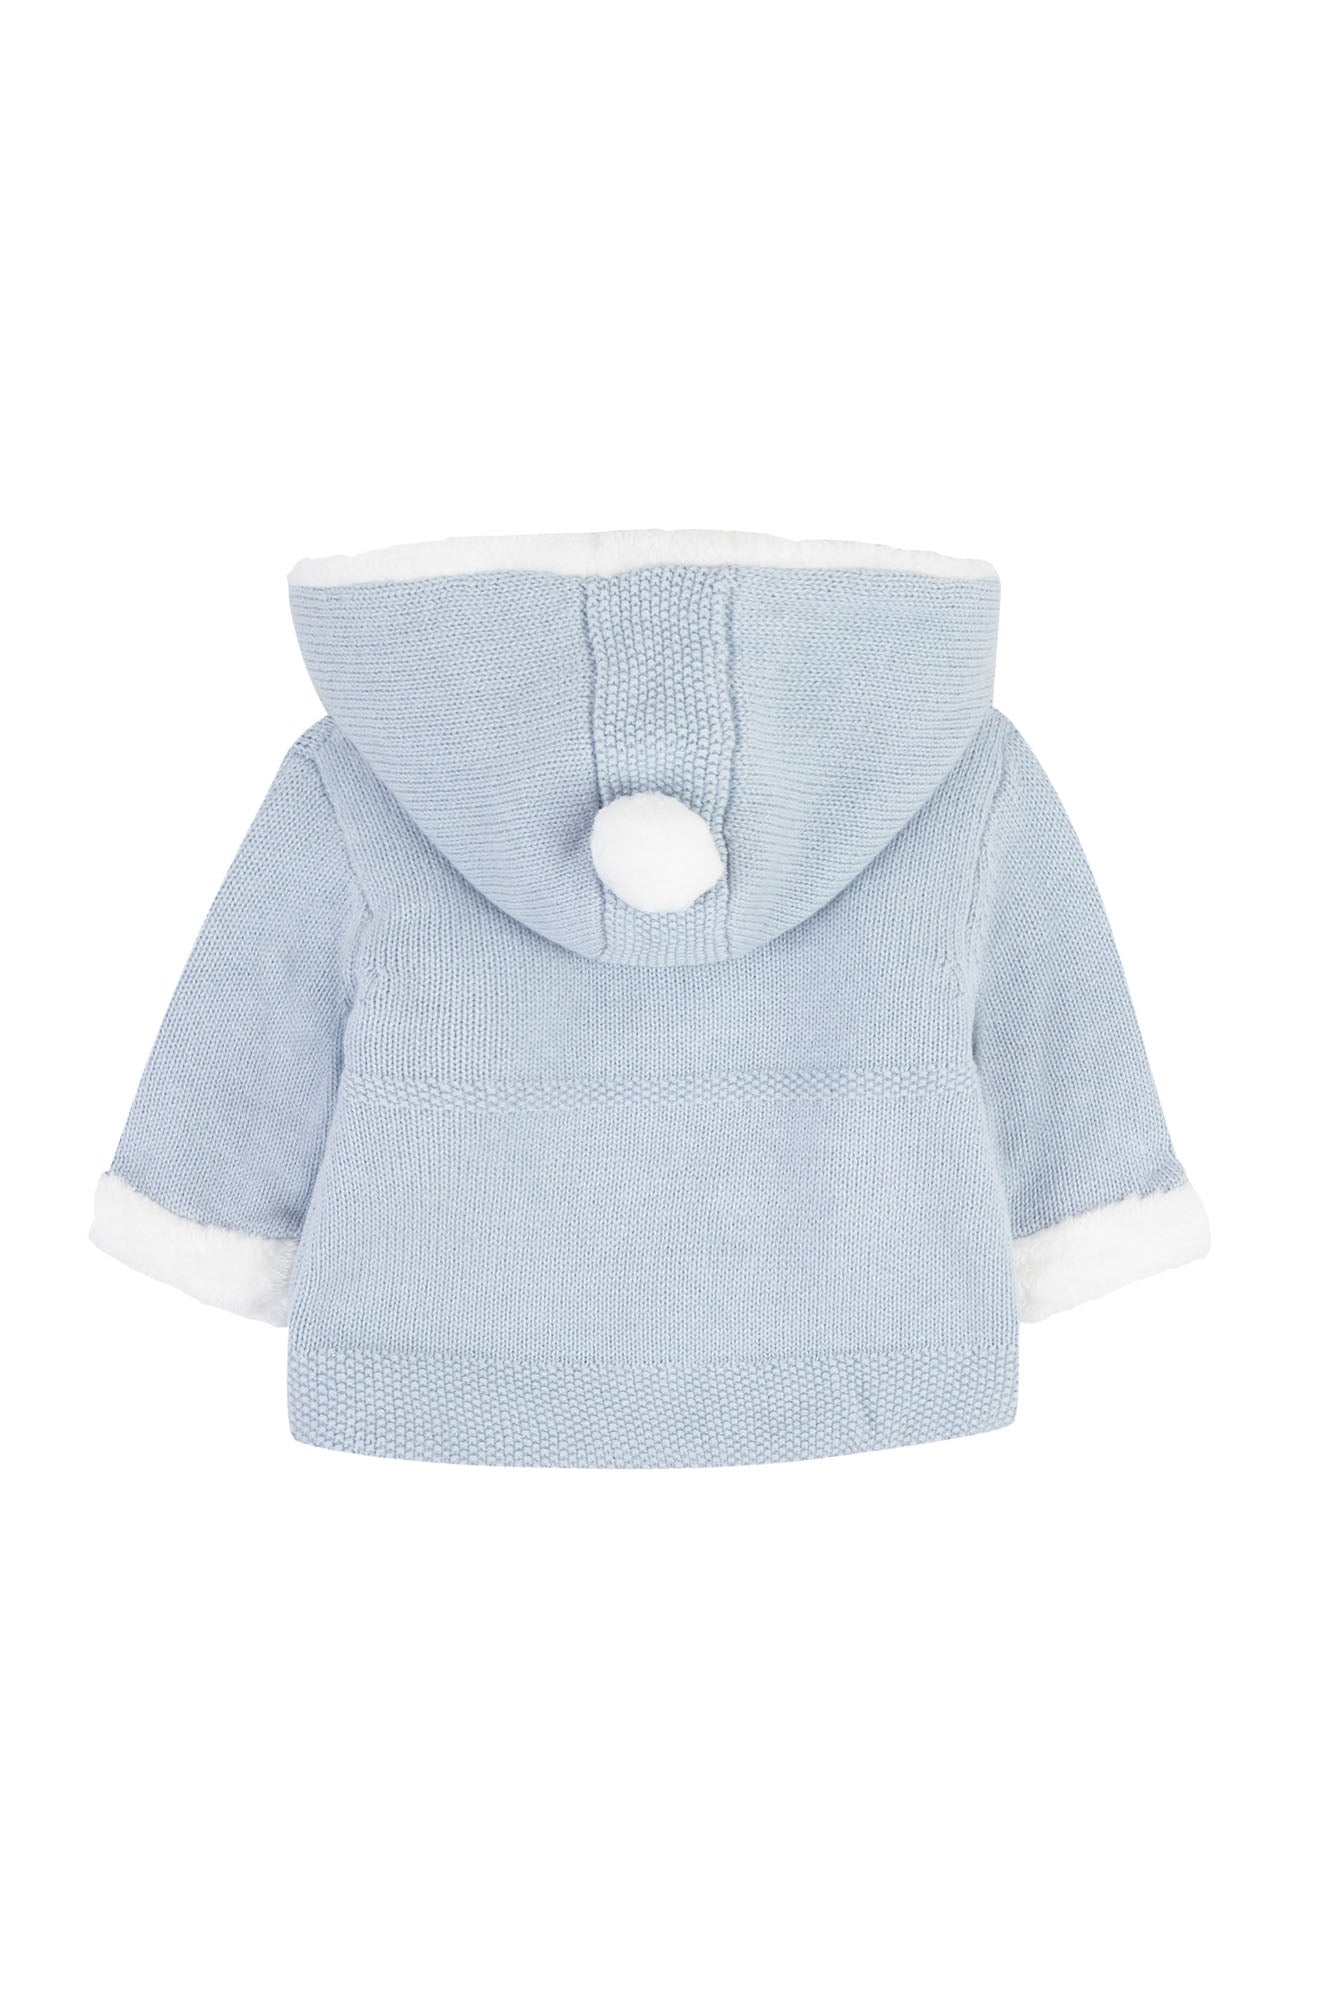 Tartine Baby Knit Hooded Sweater